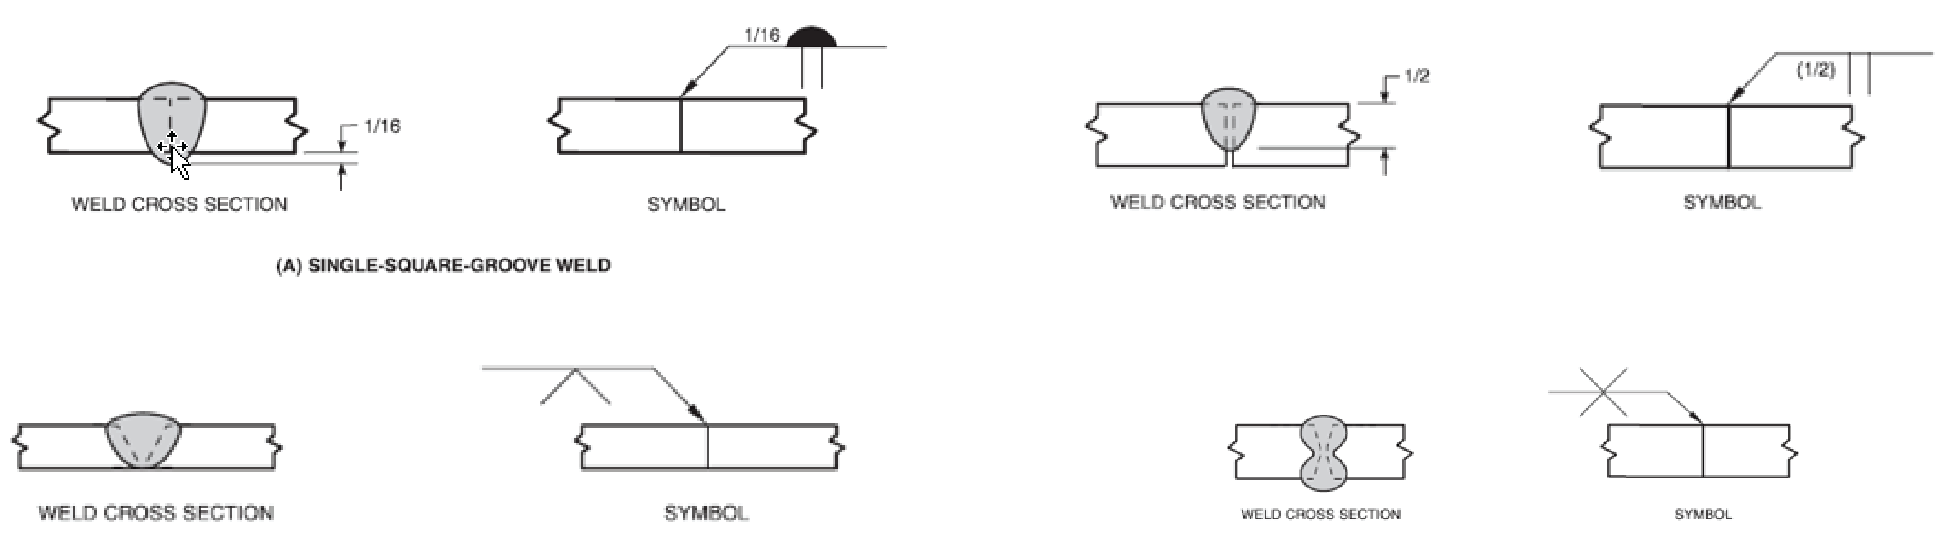 An Image of various cross sections of welds with annotated welding symbols - TPM